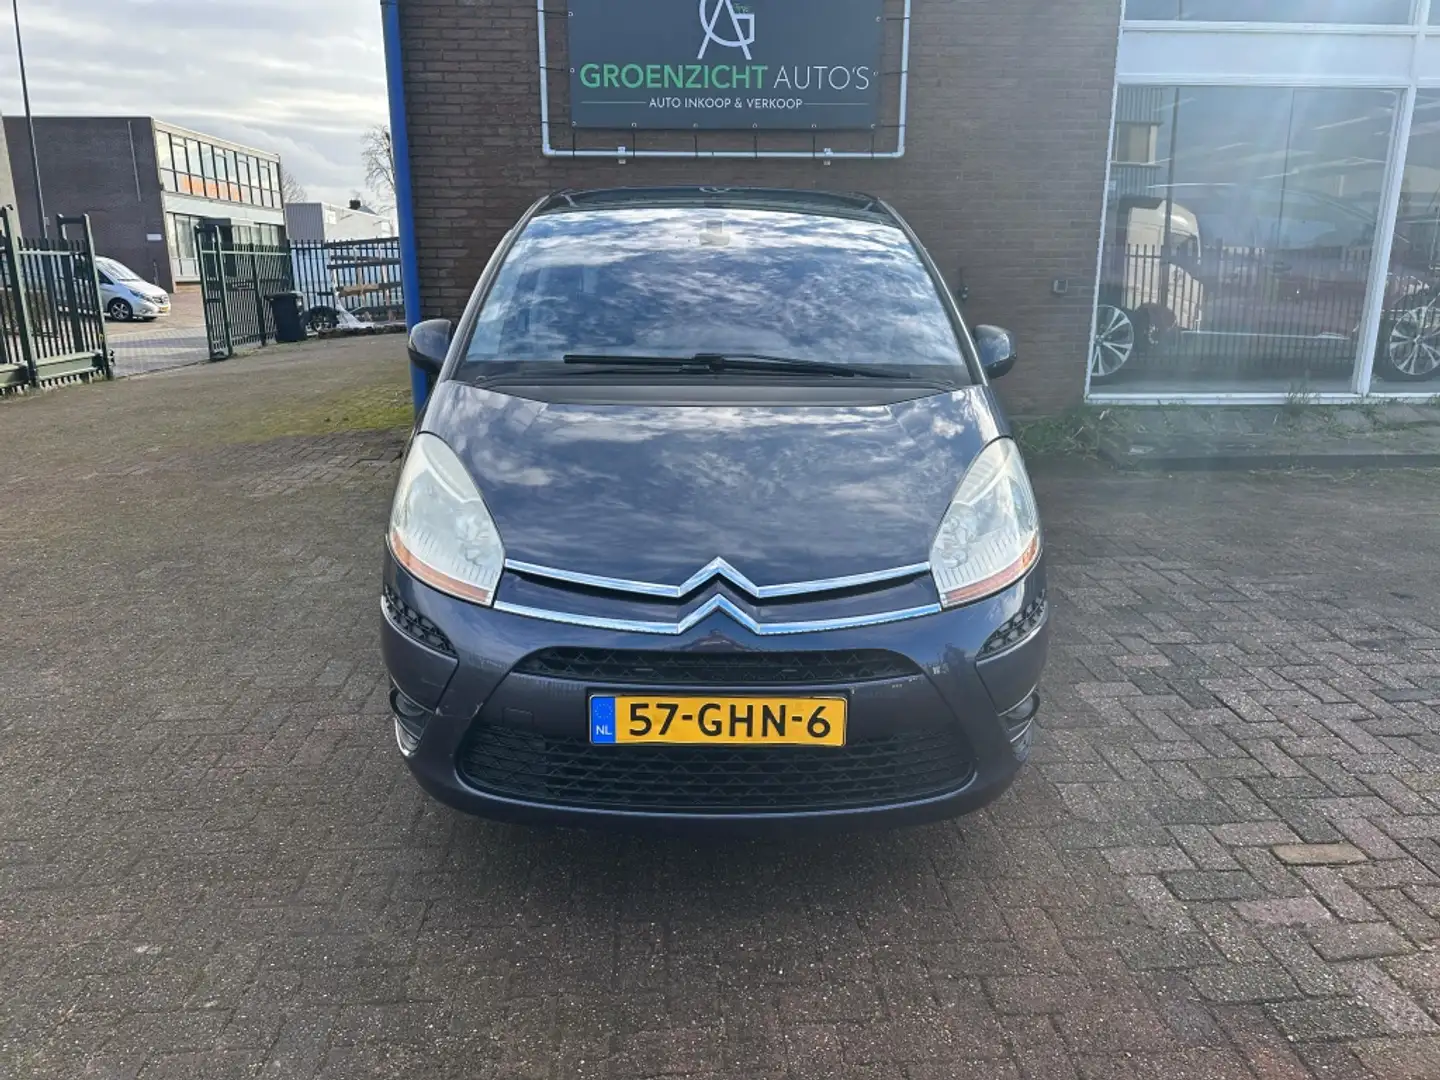 Citroen C4 Picasso 2.0-16V Ambiance 5p. Fioletowy - 2